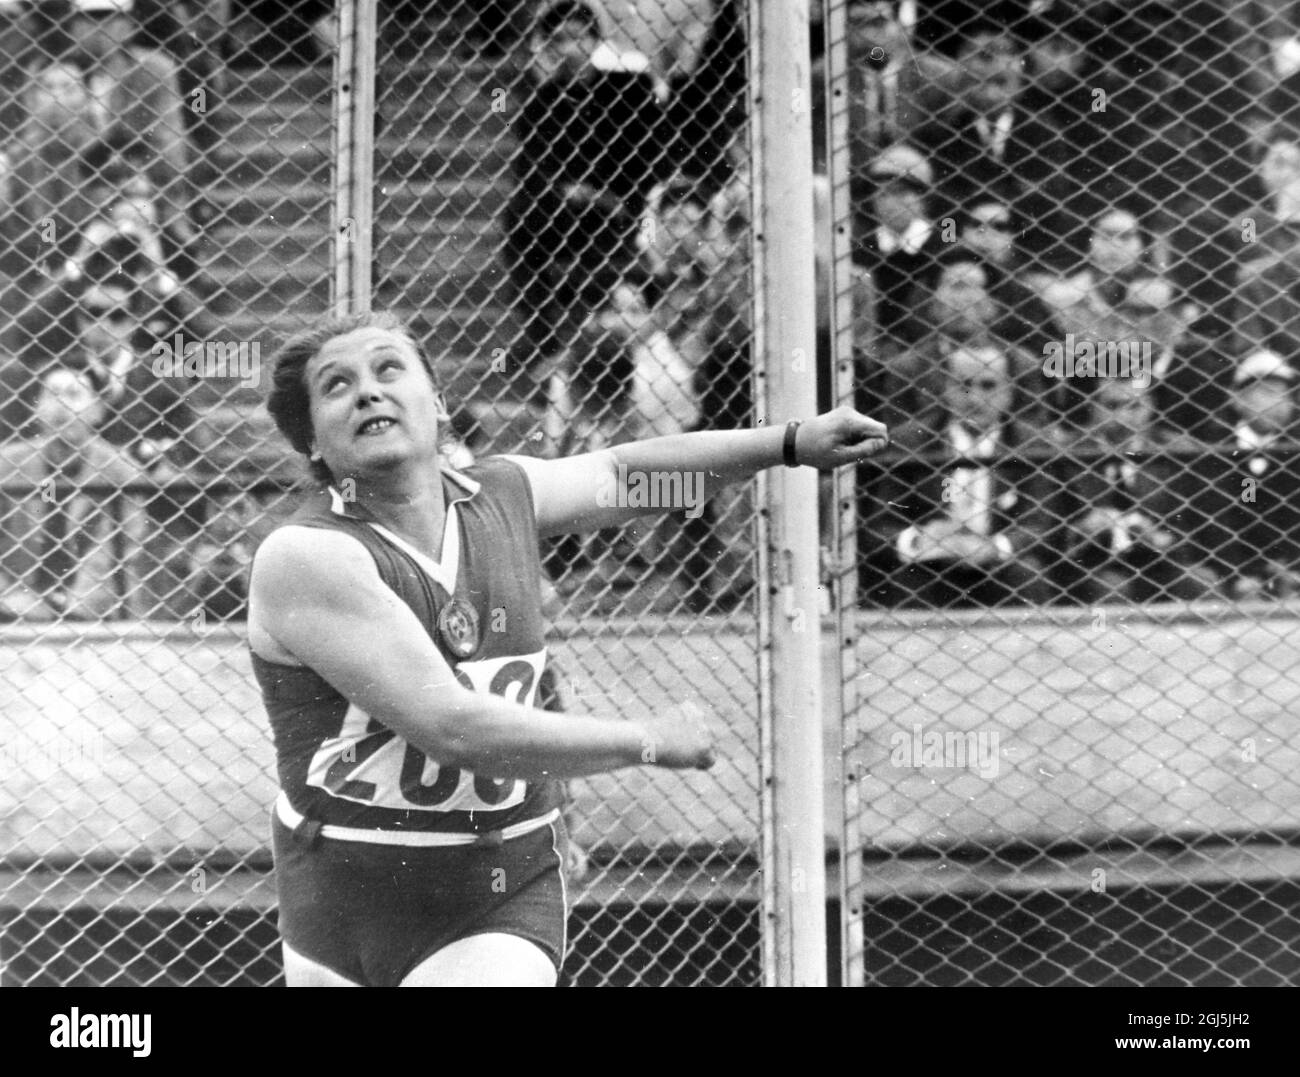 OLYMPICS, OLYMPIC SPORT GAMES - THE XVIII 18TH OLYMPIAD IN TOKYO, JAPAN - DISCUS THROW TAMARA PRESS OF RUSSIA IN ACTION ; 21 OCTOBER 1964 Stock Photo